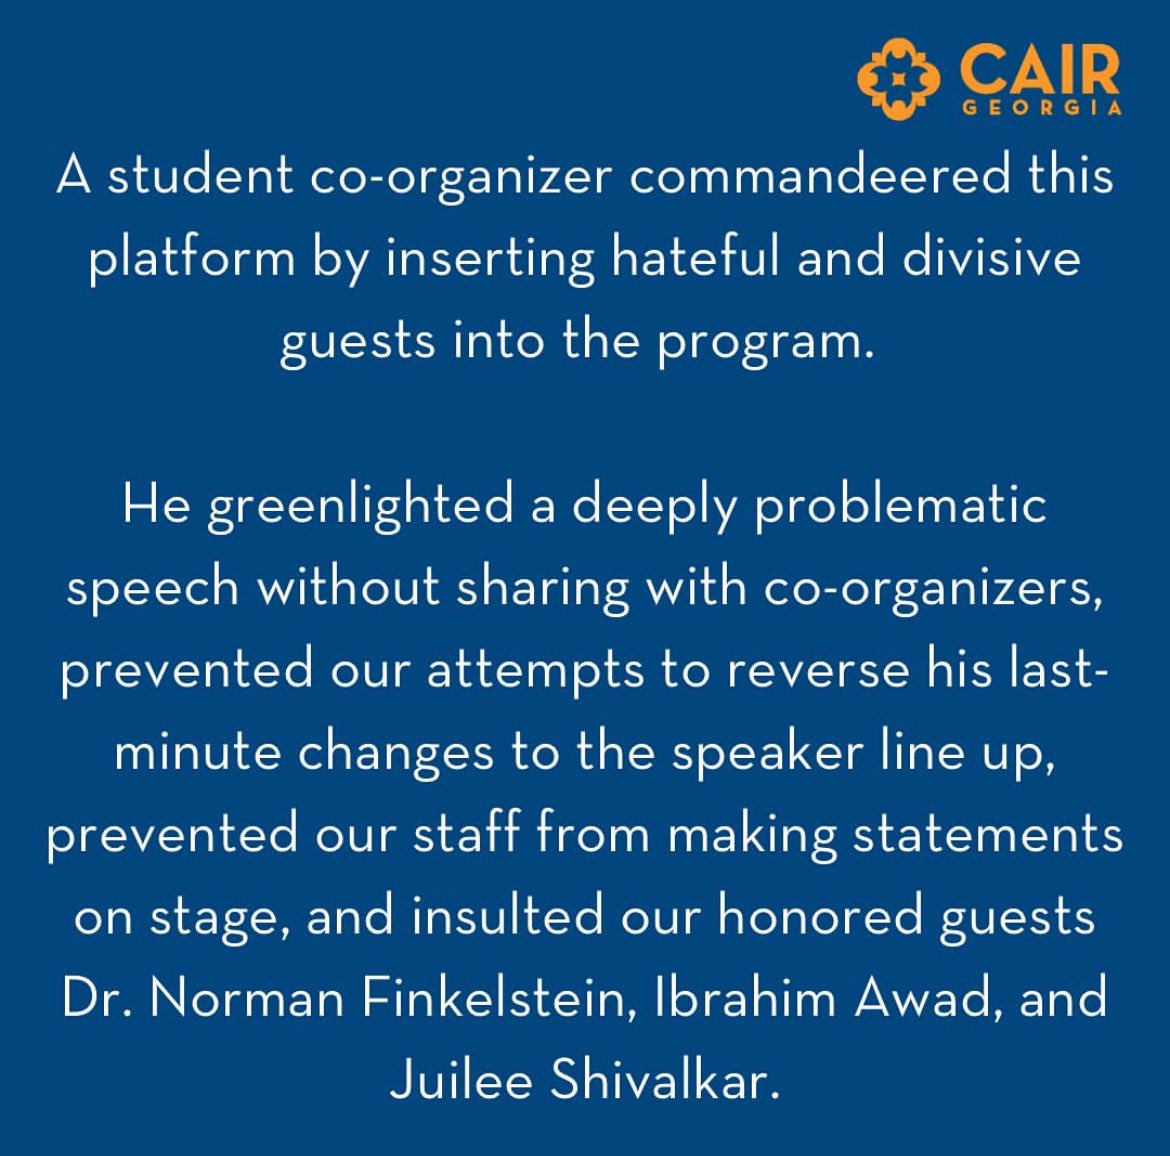 CAIR GA posted a statement regarding the cancellation of Norman Finkelstein’s talk at Emory University today